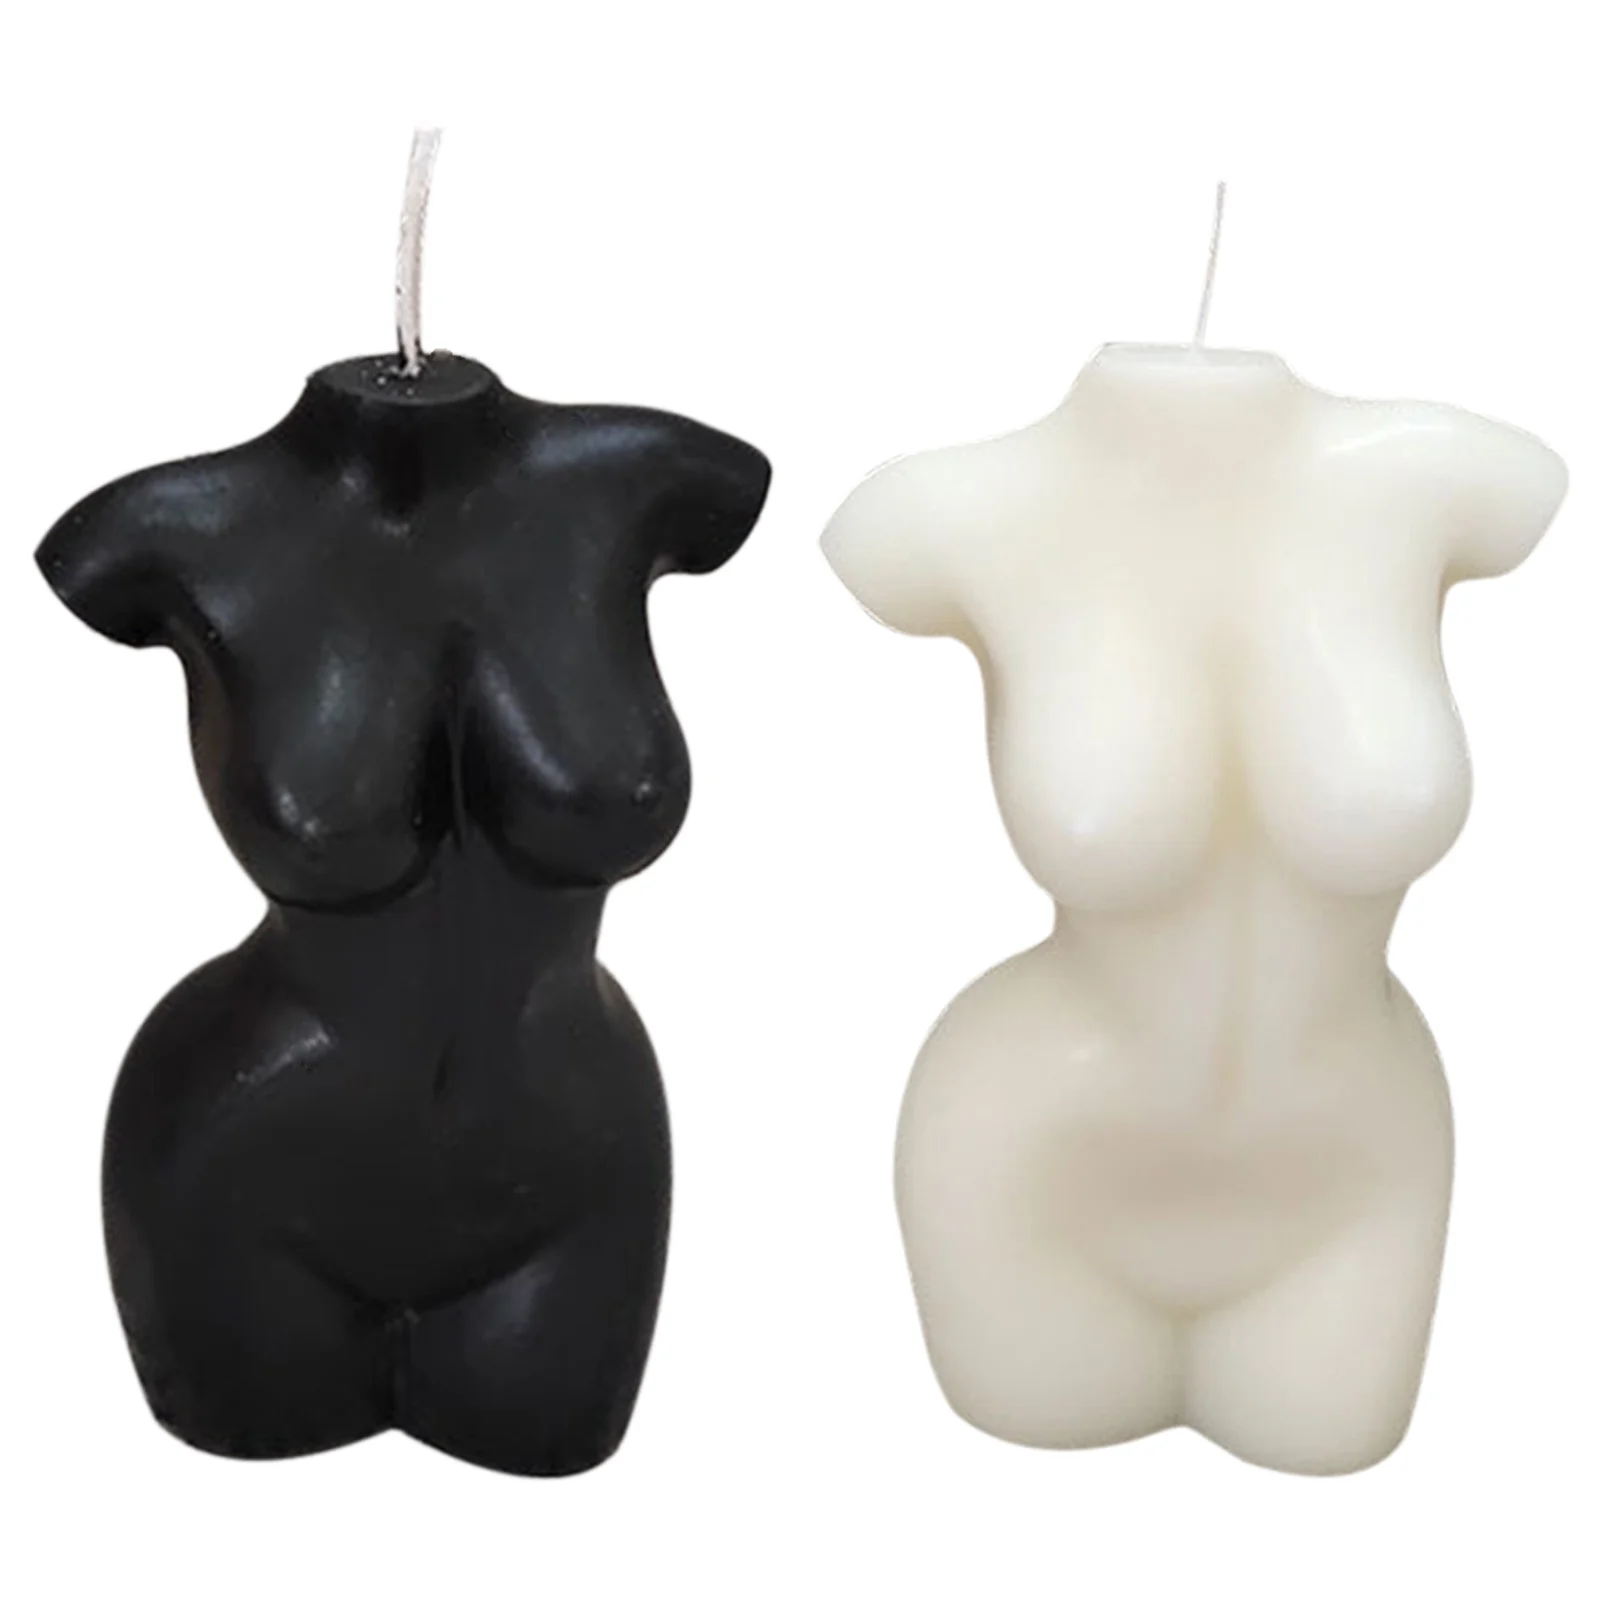 3D Female Naked Body Shape Torso Statue Wax Scented Candle Home Decor Crafts 